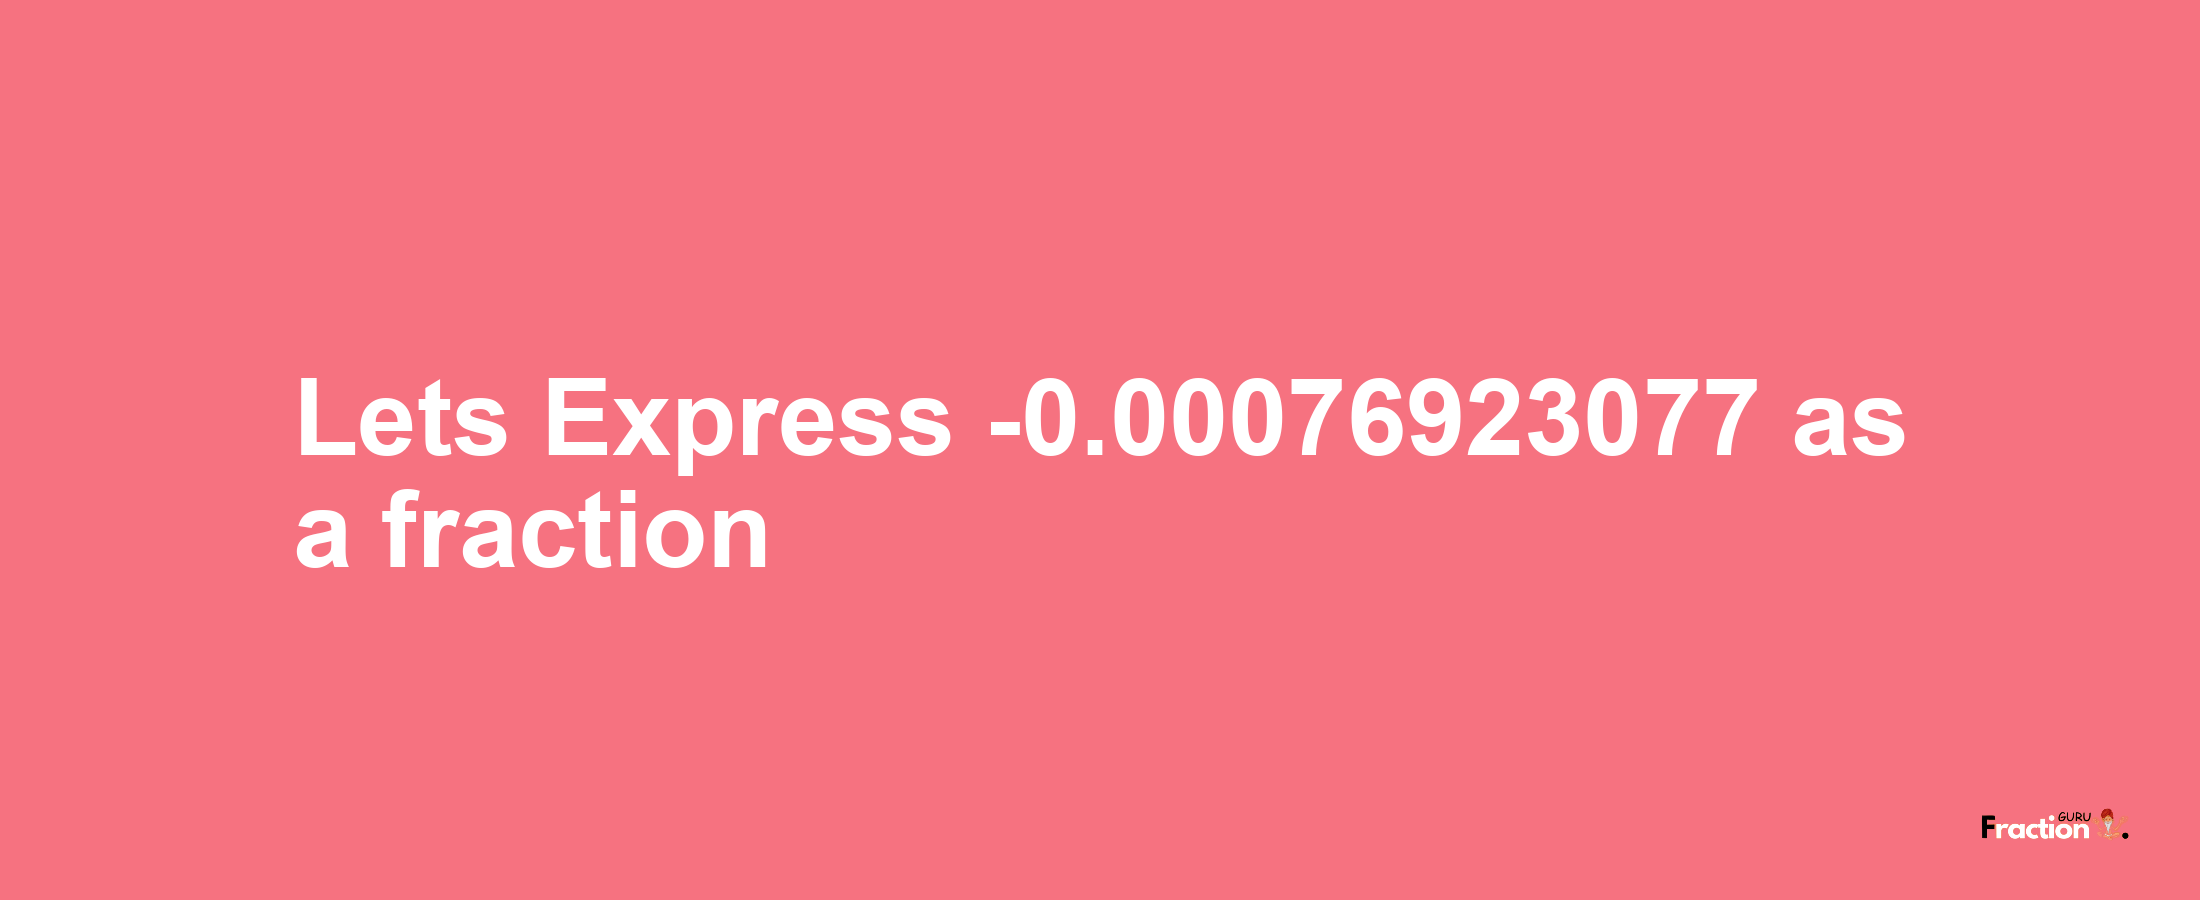 Lets Express -0.00076923077 as afraction